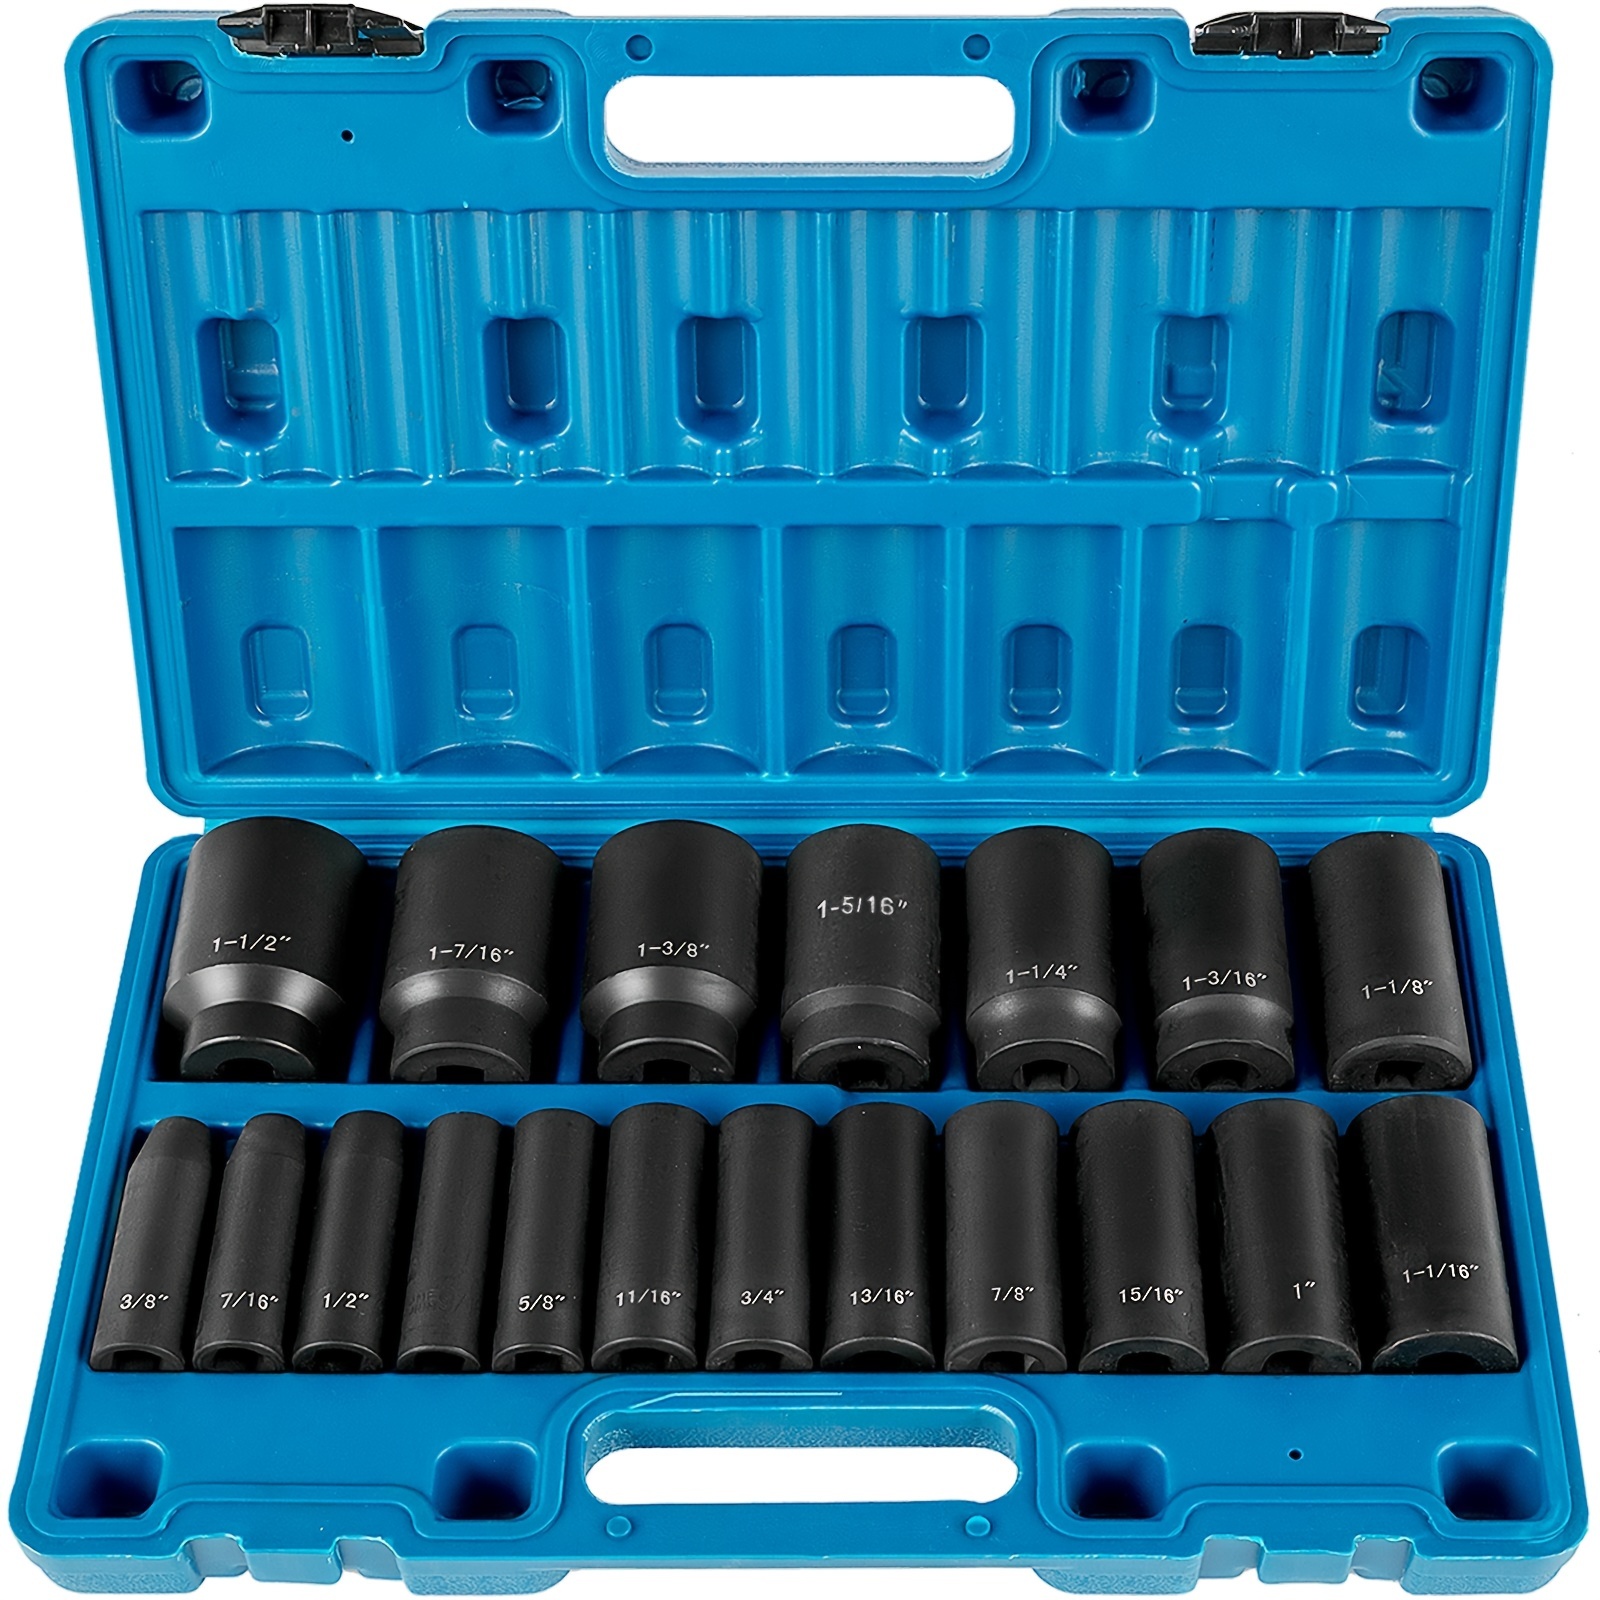 

19pcs Impact Socket Set 1/2 Inches, Deep Socket, 6-point Sockets, Rugged Construction, Cr-v, 1/2 Inches Drive Socket Set Impact 3/8 Inch - 1-1/2 Inch, With A Storage Cage